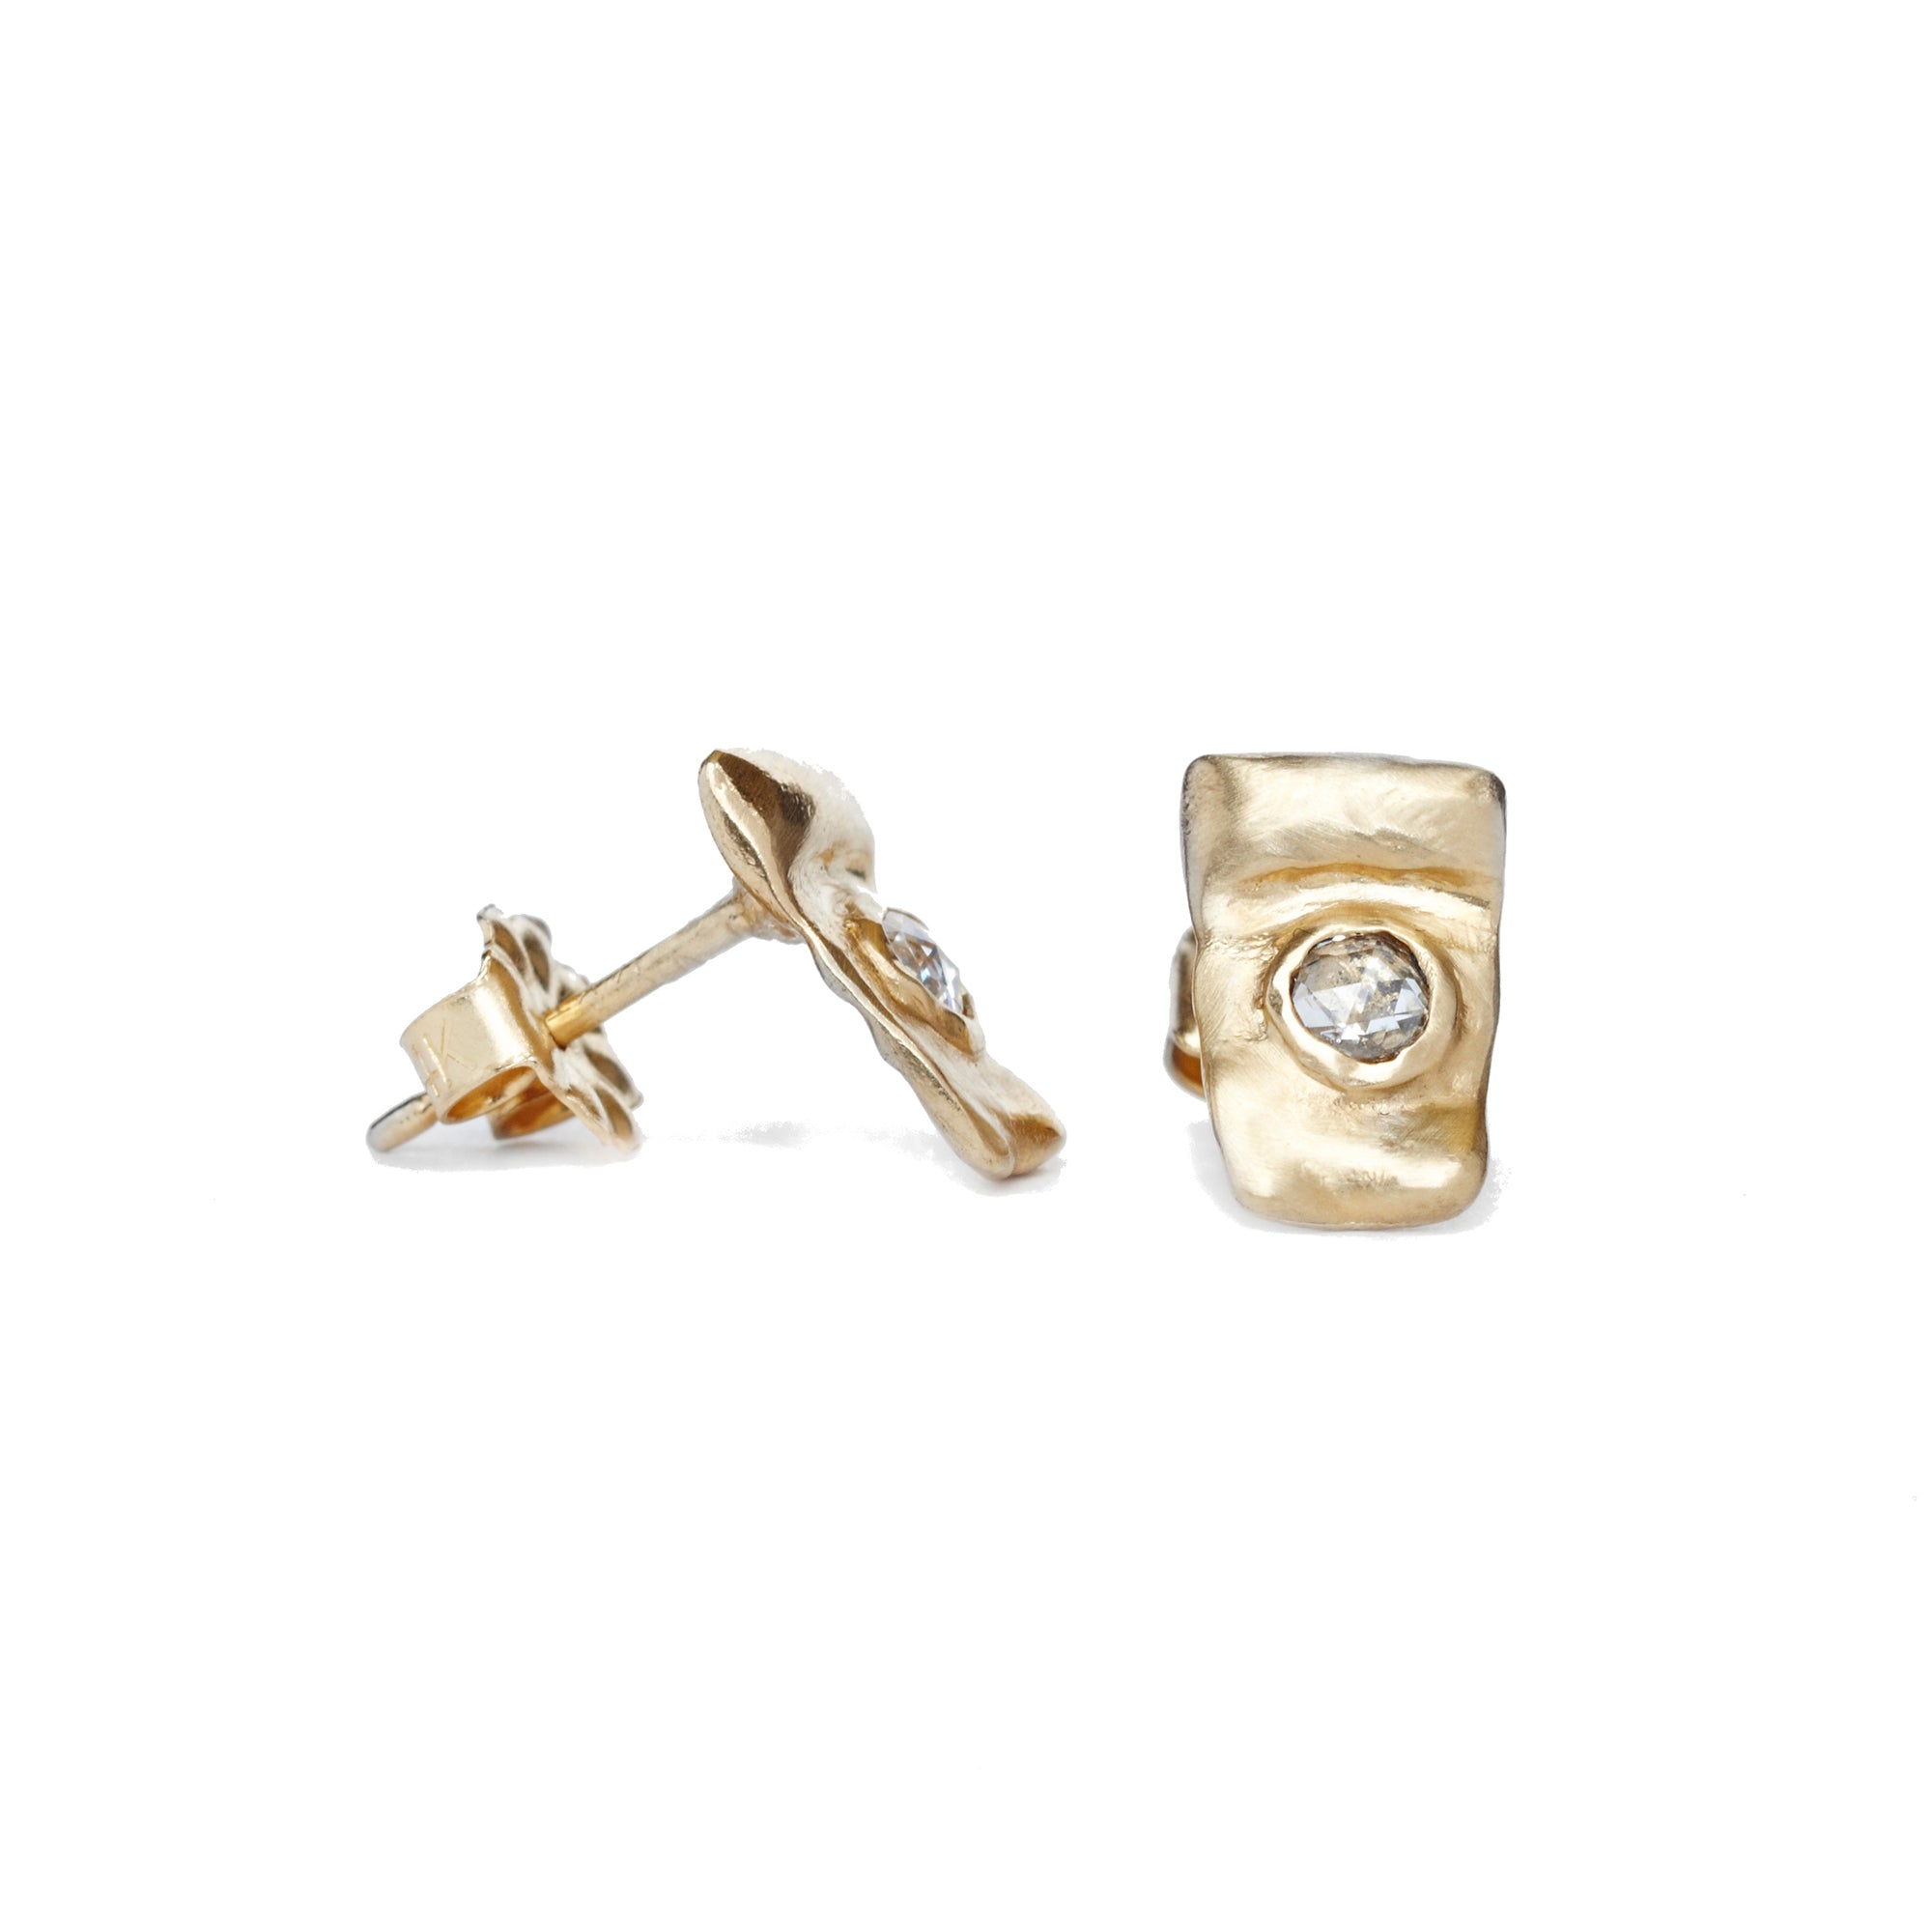 Our Pebble Studs are everyday organic studs in solid 14k yellow gold with bezel set rose cut diamonds.